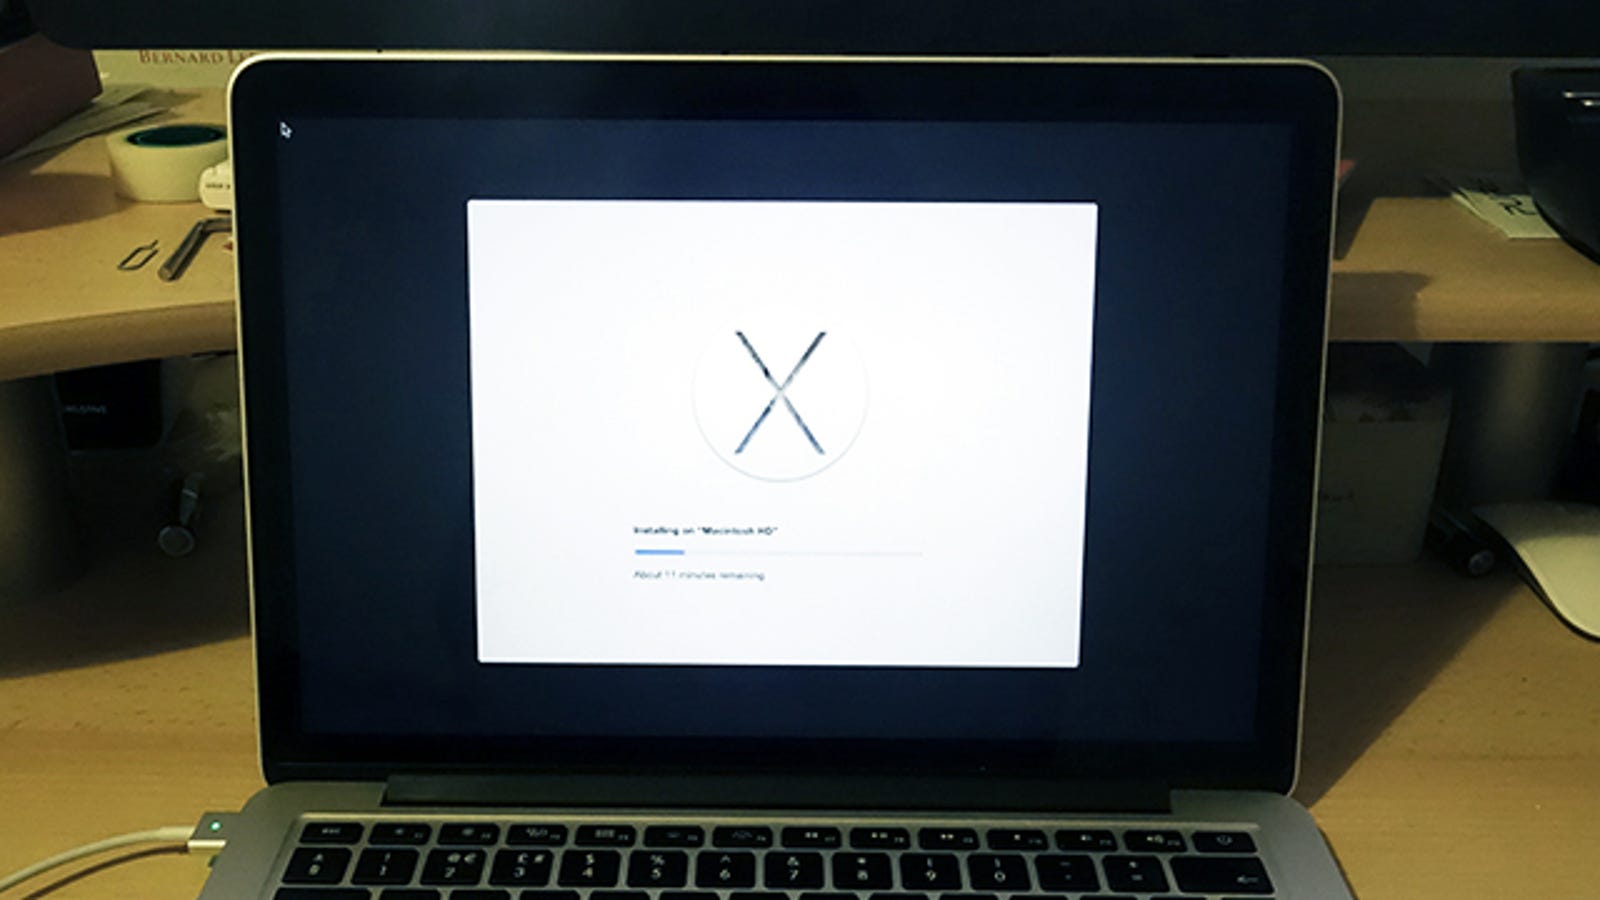 how to install new mac os